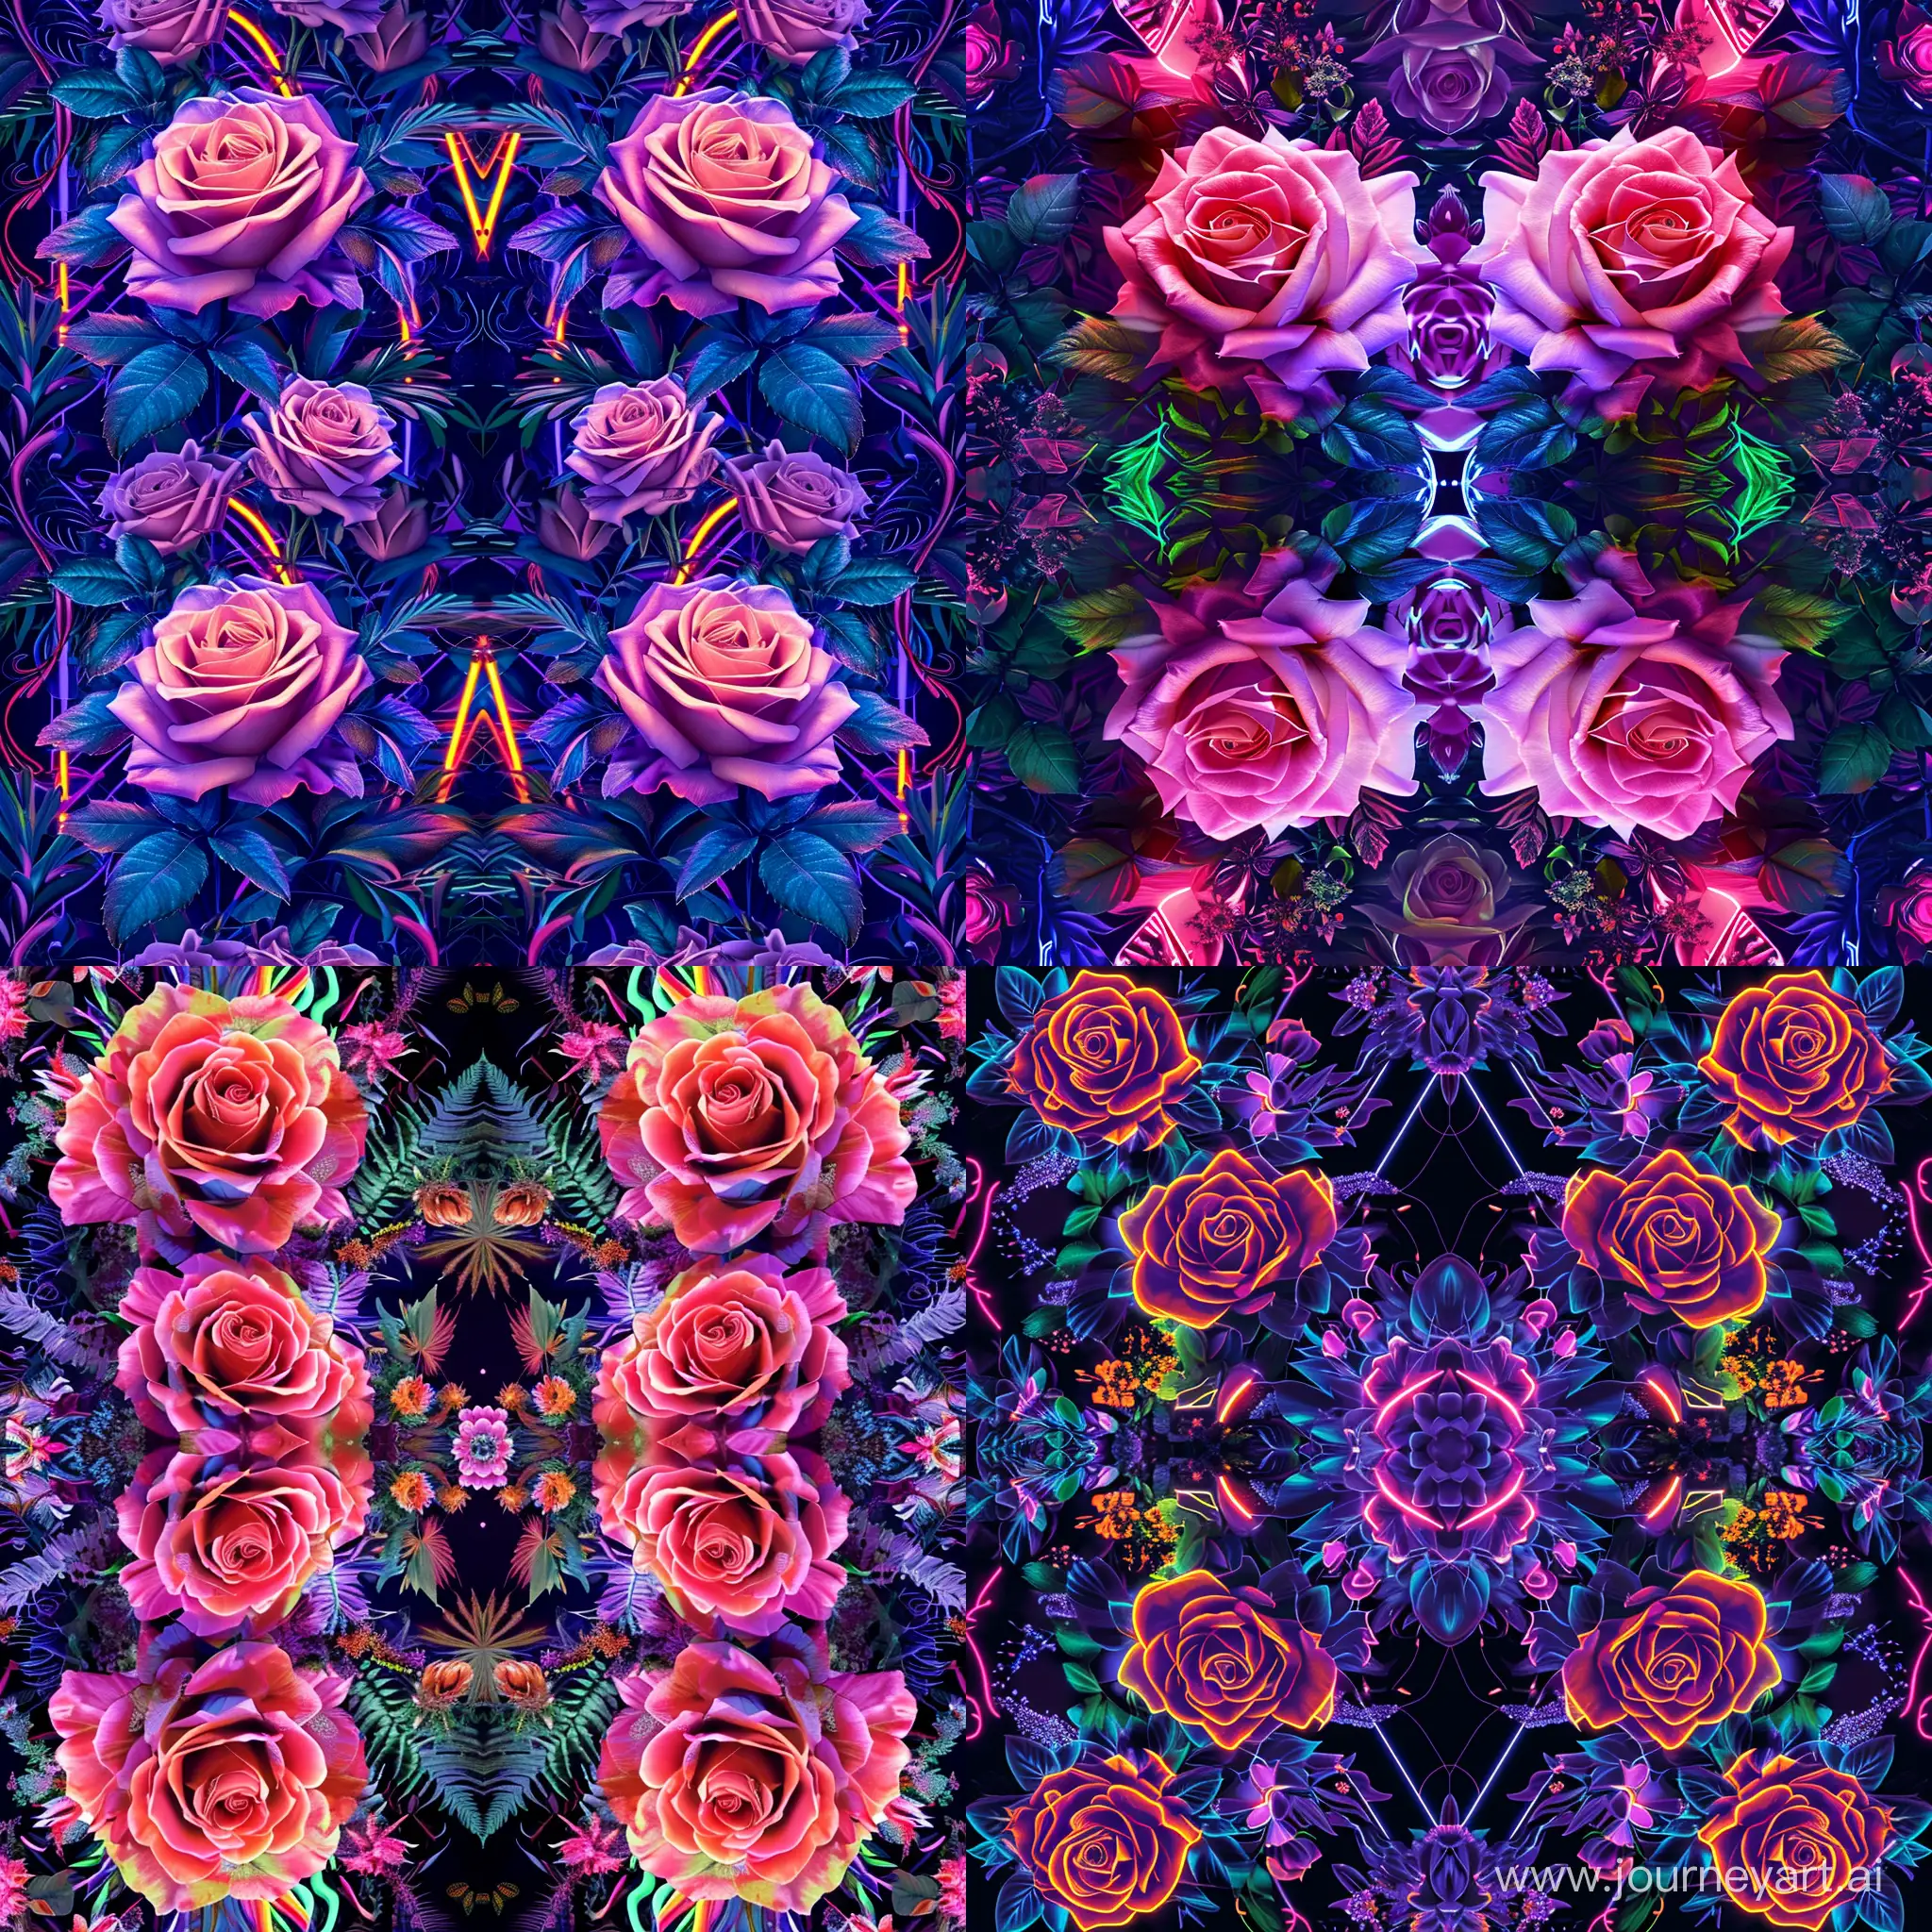 Symmetrical-Neon-Roses-and-Plants-Pattern-Inspired-by-Emmanuele-Dascanio-and-Roberto-Giavarini